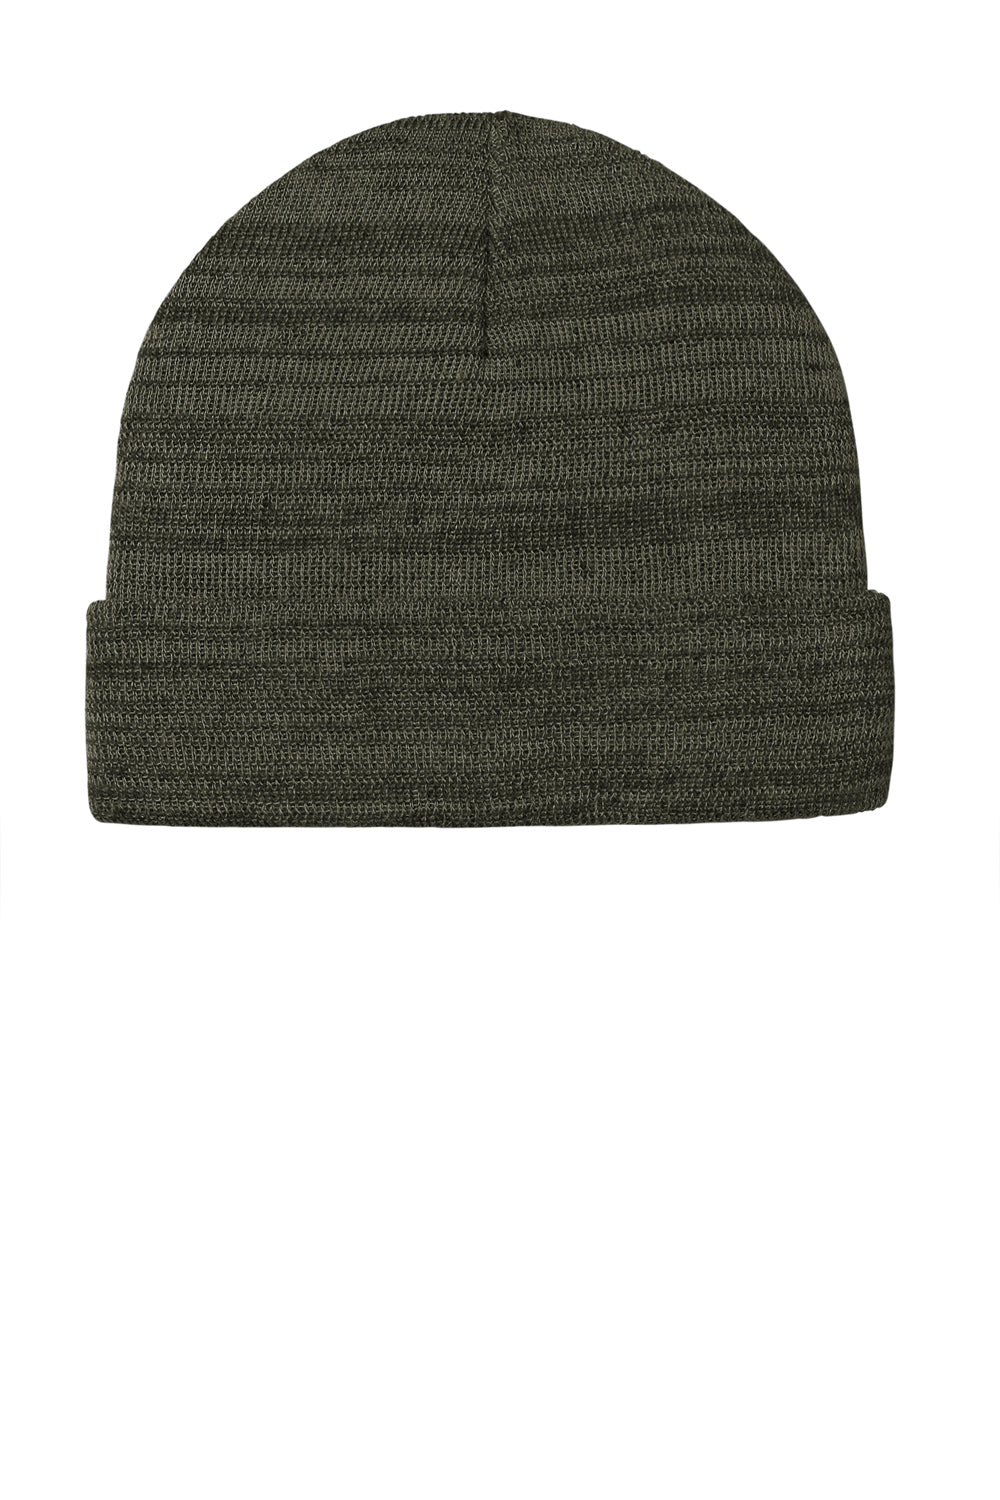 Port Authority C939 Knit Cuff Beanie Heather Olive Green Front